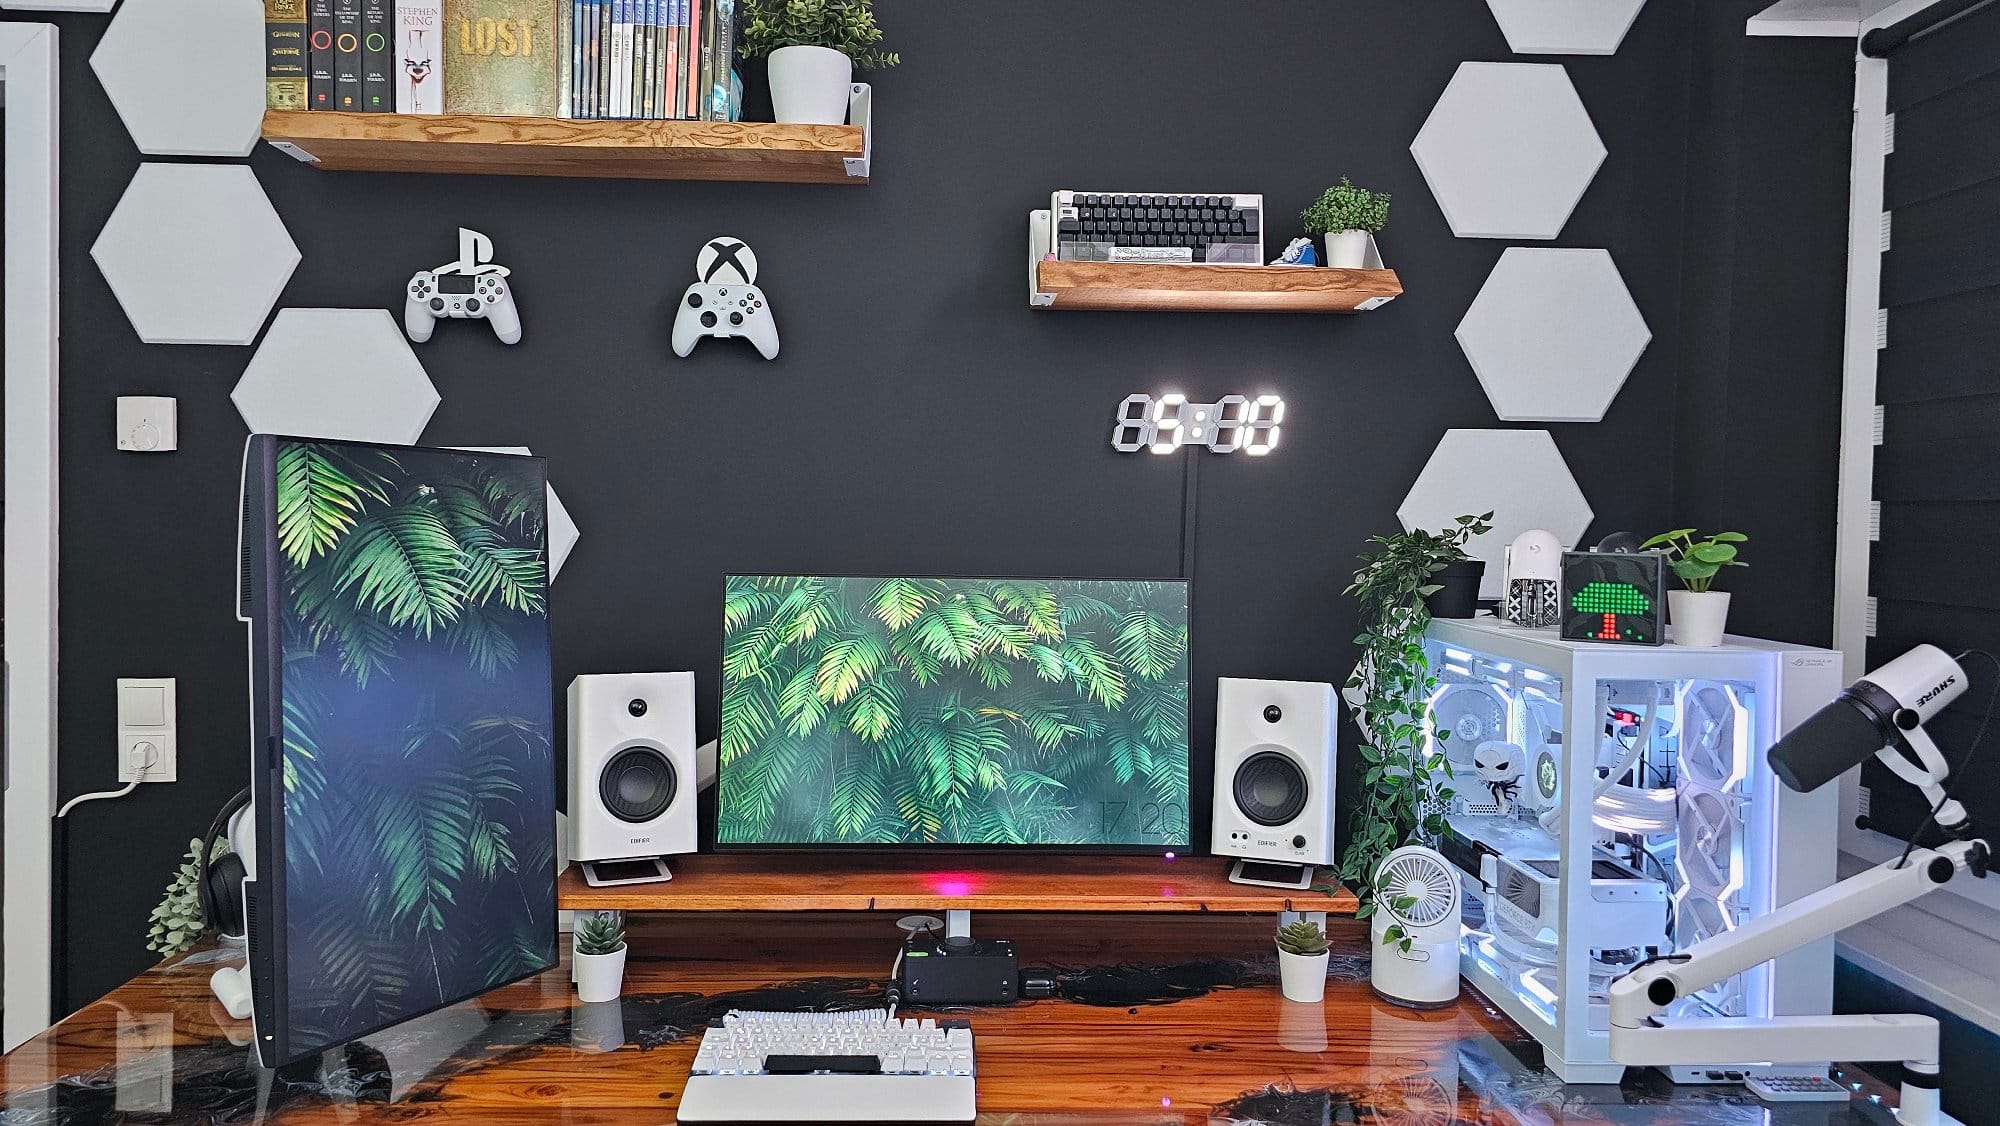 A well-organised gaming station featuring a decorative black wall with mounted hexagon shapes, gaming controllers, a digital clock, and floating shelves with books and plants, complemented by a vibrant dual-monitor setup and a white-themed custom PC